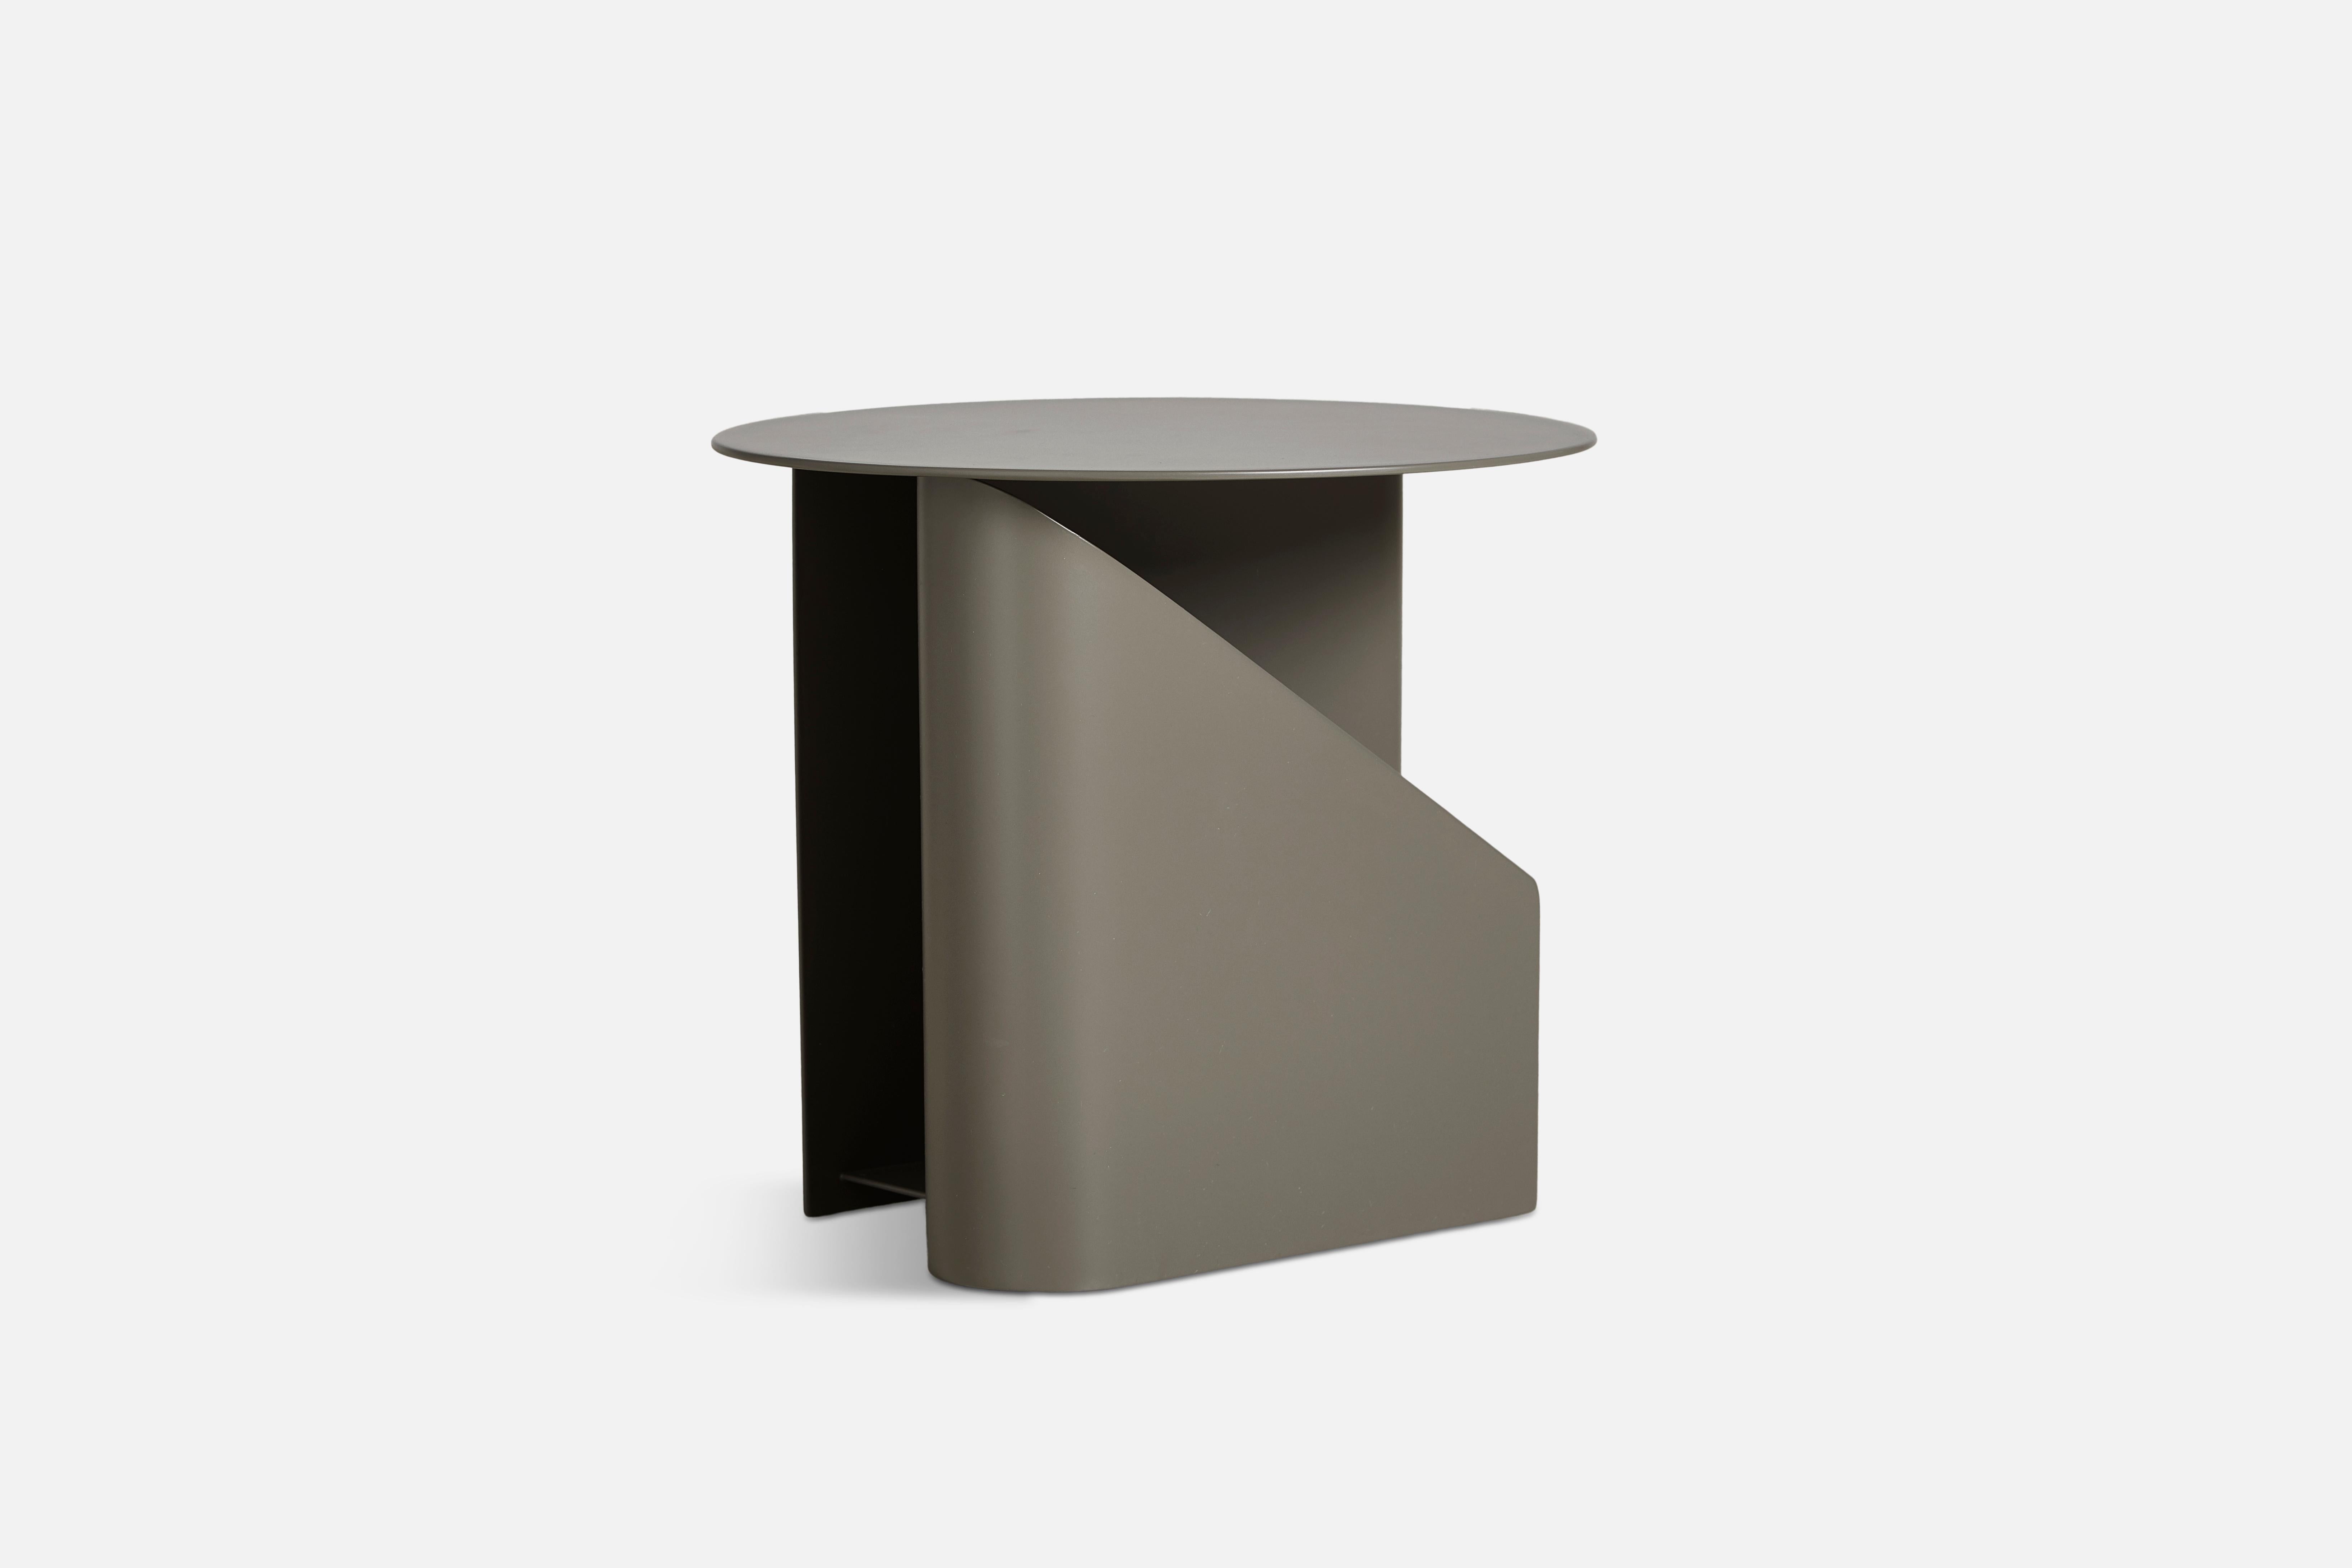 Taupe Sentrum side table by Schmahl +Schnippering
Materials: Metal
Dimensions: D 40 x W 40 x H 36 cm
Also available in different colours. Please contact us.

The founders, Mia and Torben Koed, decided to put their 30 years of experience into a